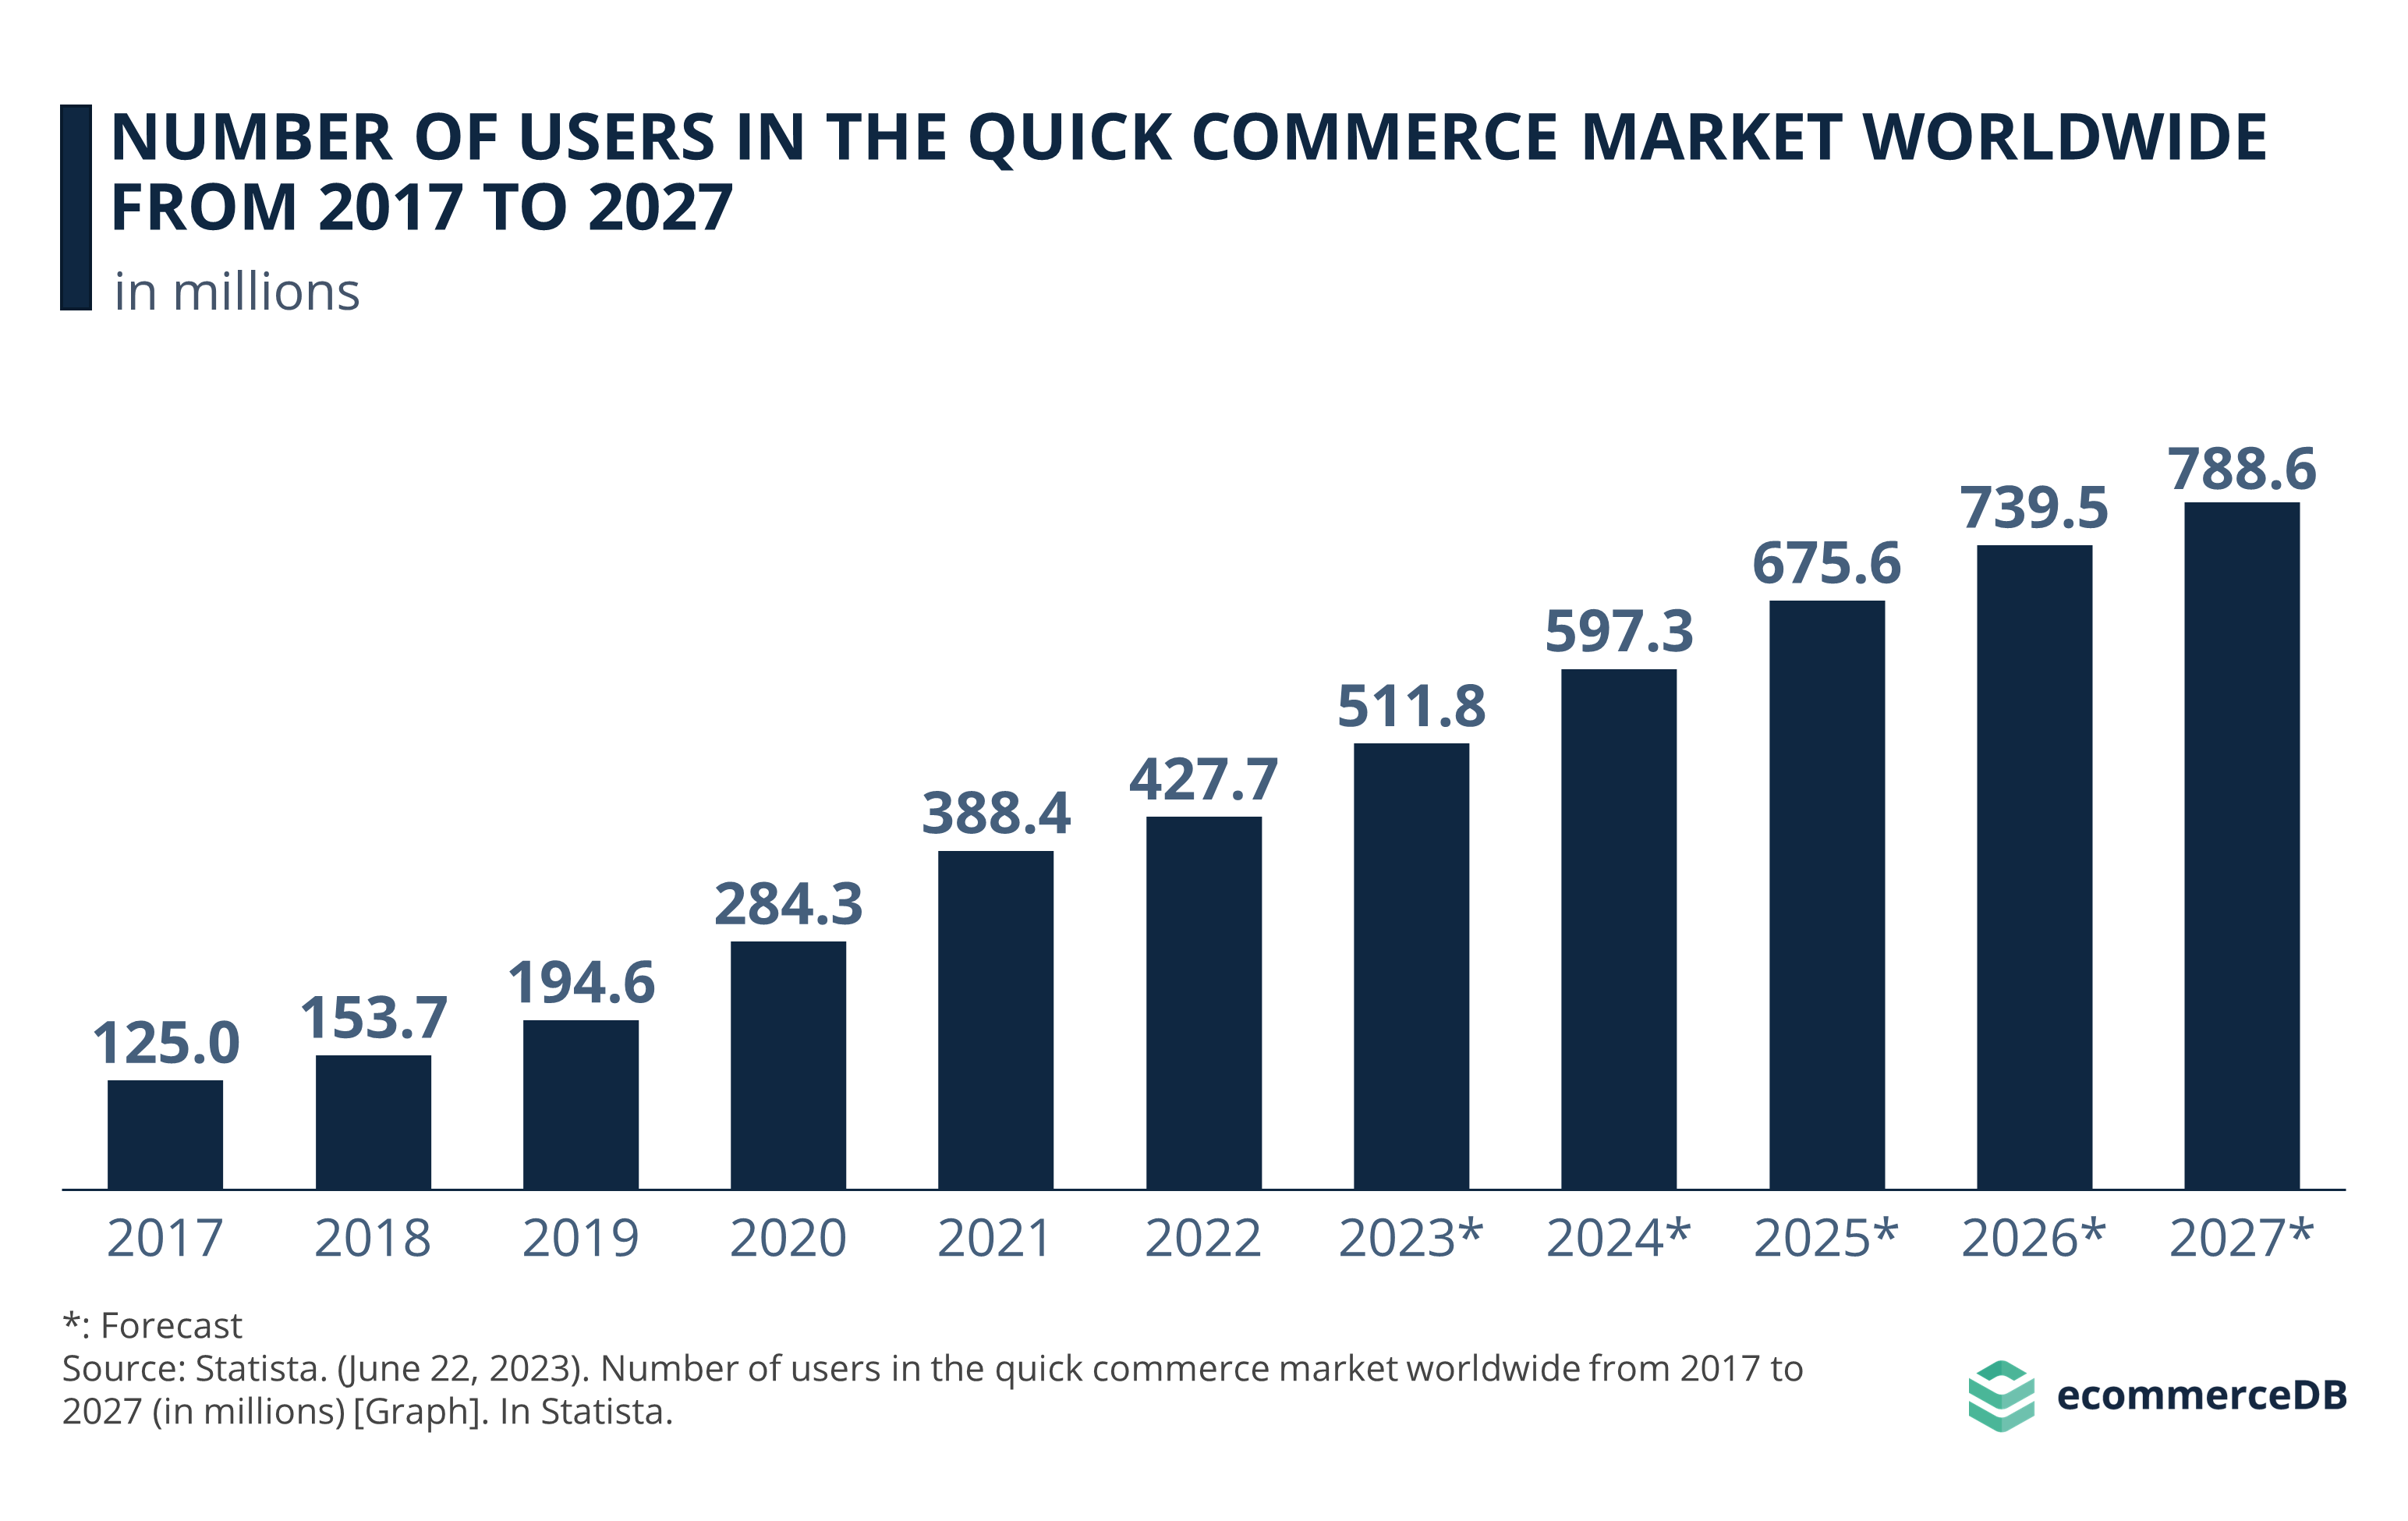 Number of Users in the Quick Commerce Market Worldwide from 2017 to 2027